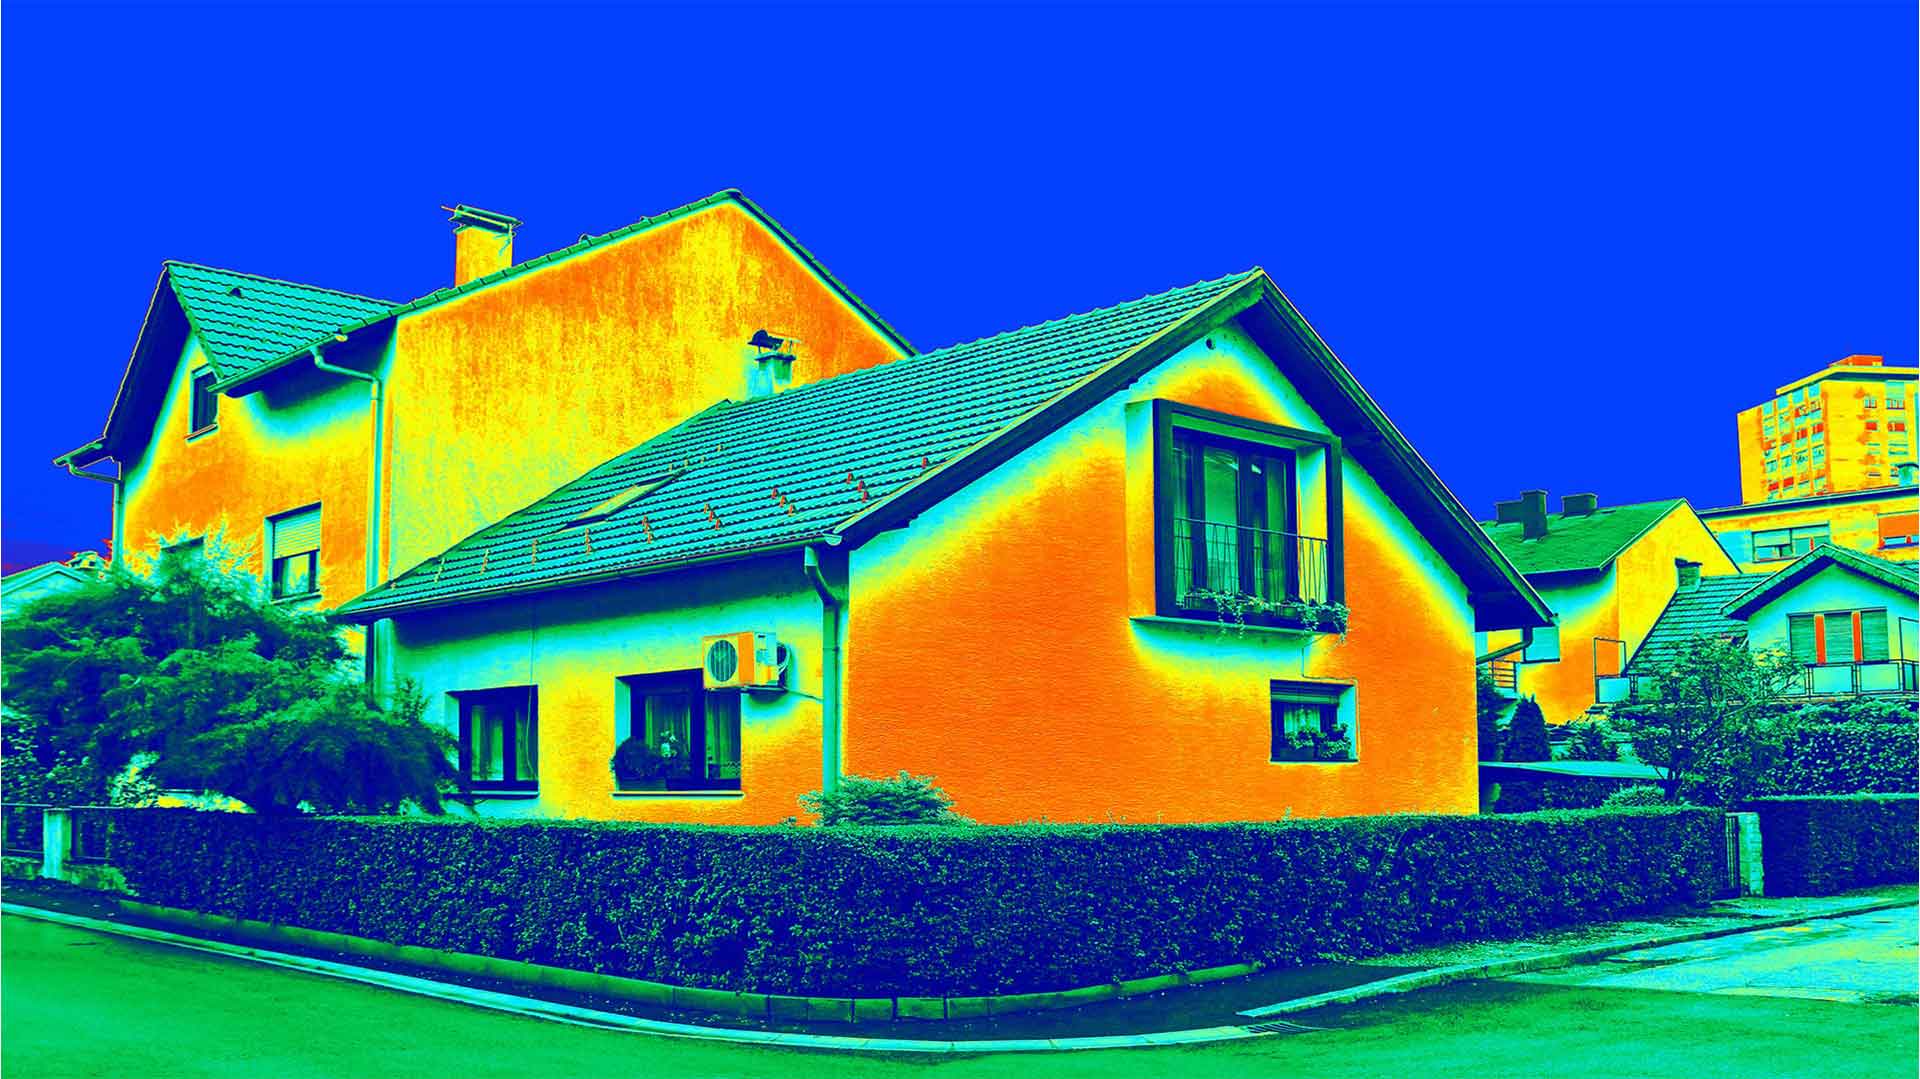 Infrared thermography moisture intrusion testing in Los Angeles